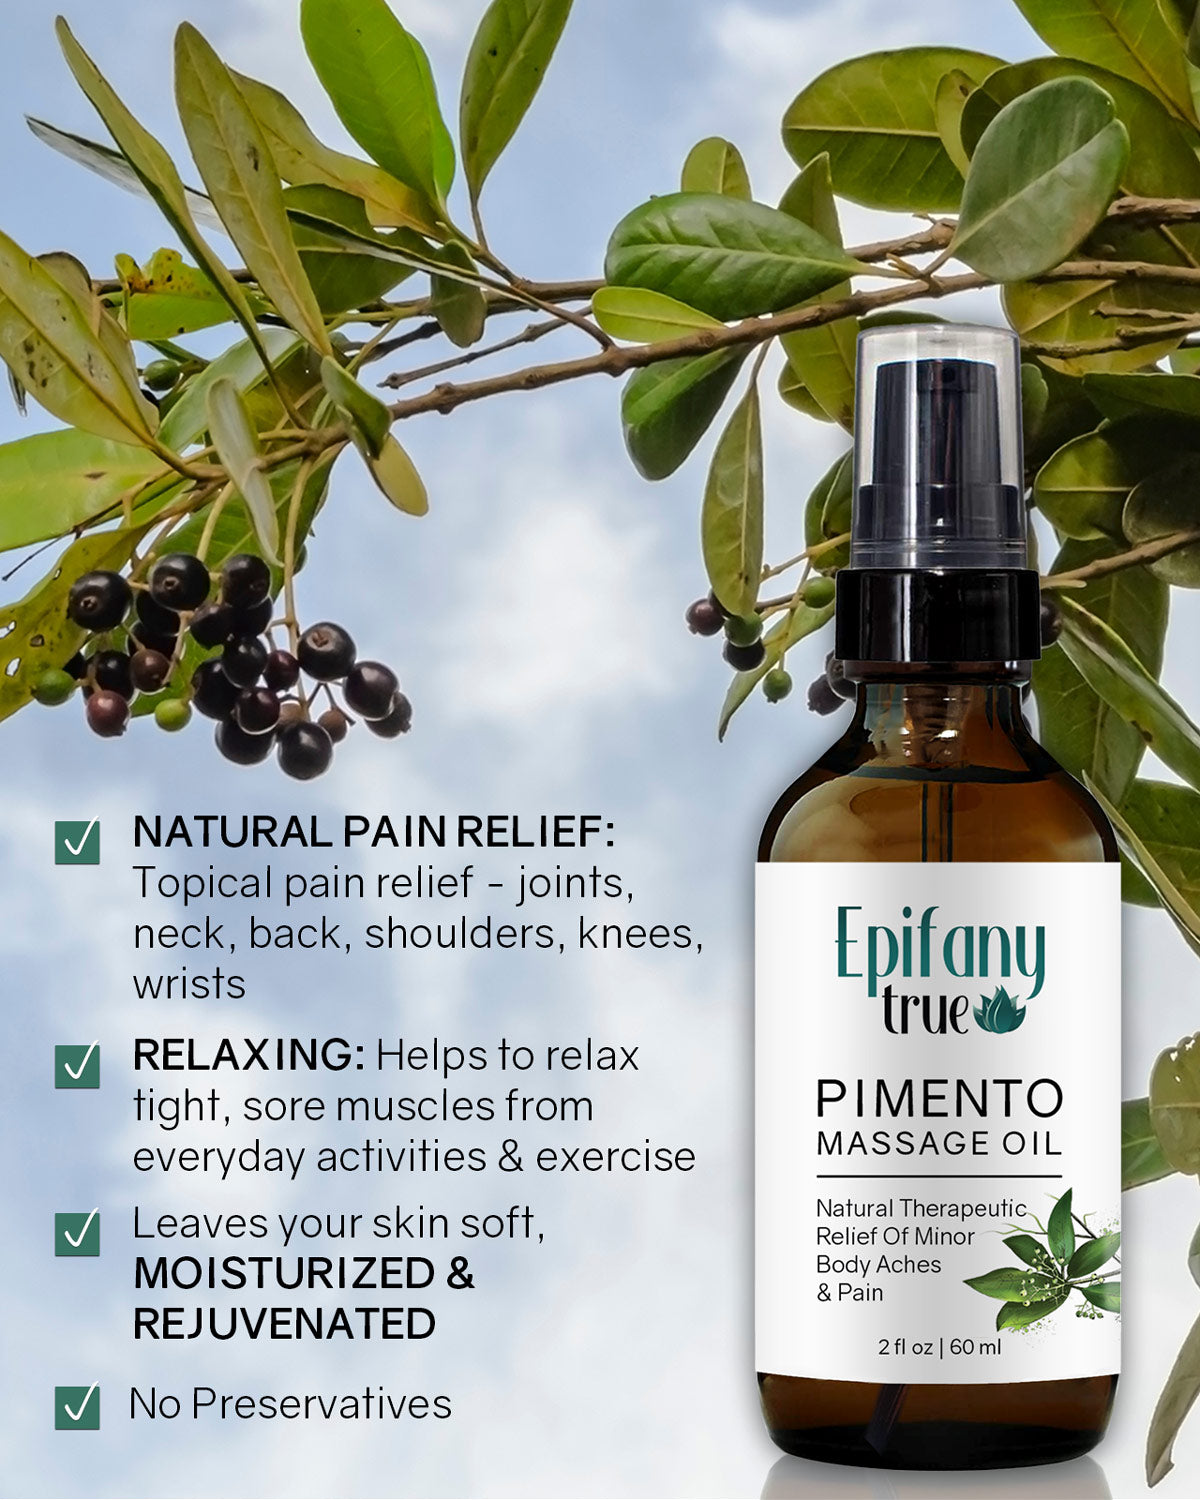 Epifany True Pimento Massage Oil is a natural therapeutic relief oil for minor aches and pain